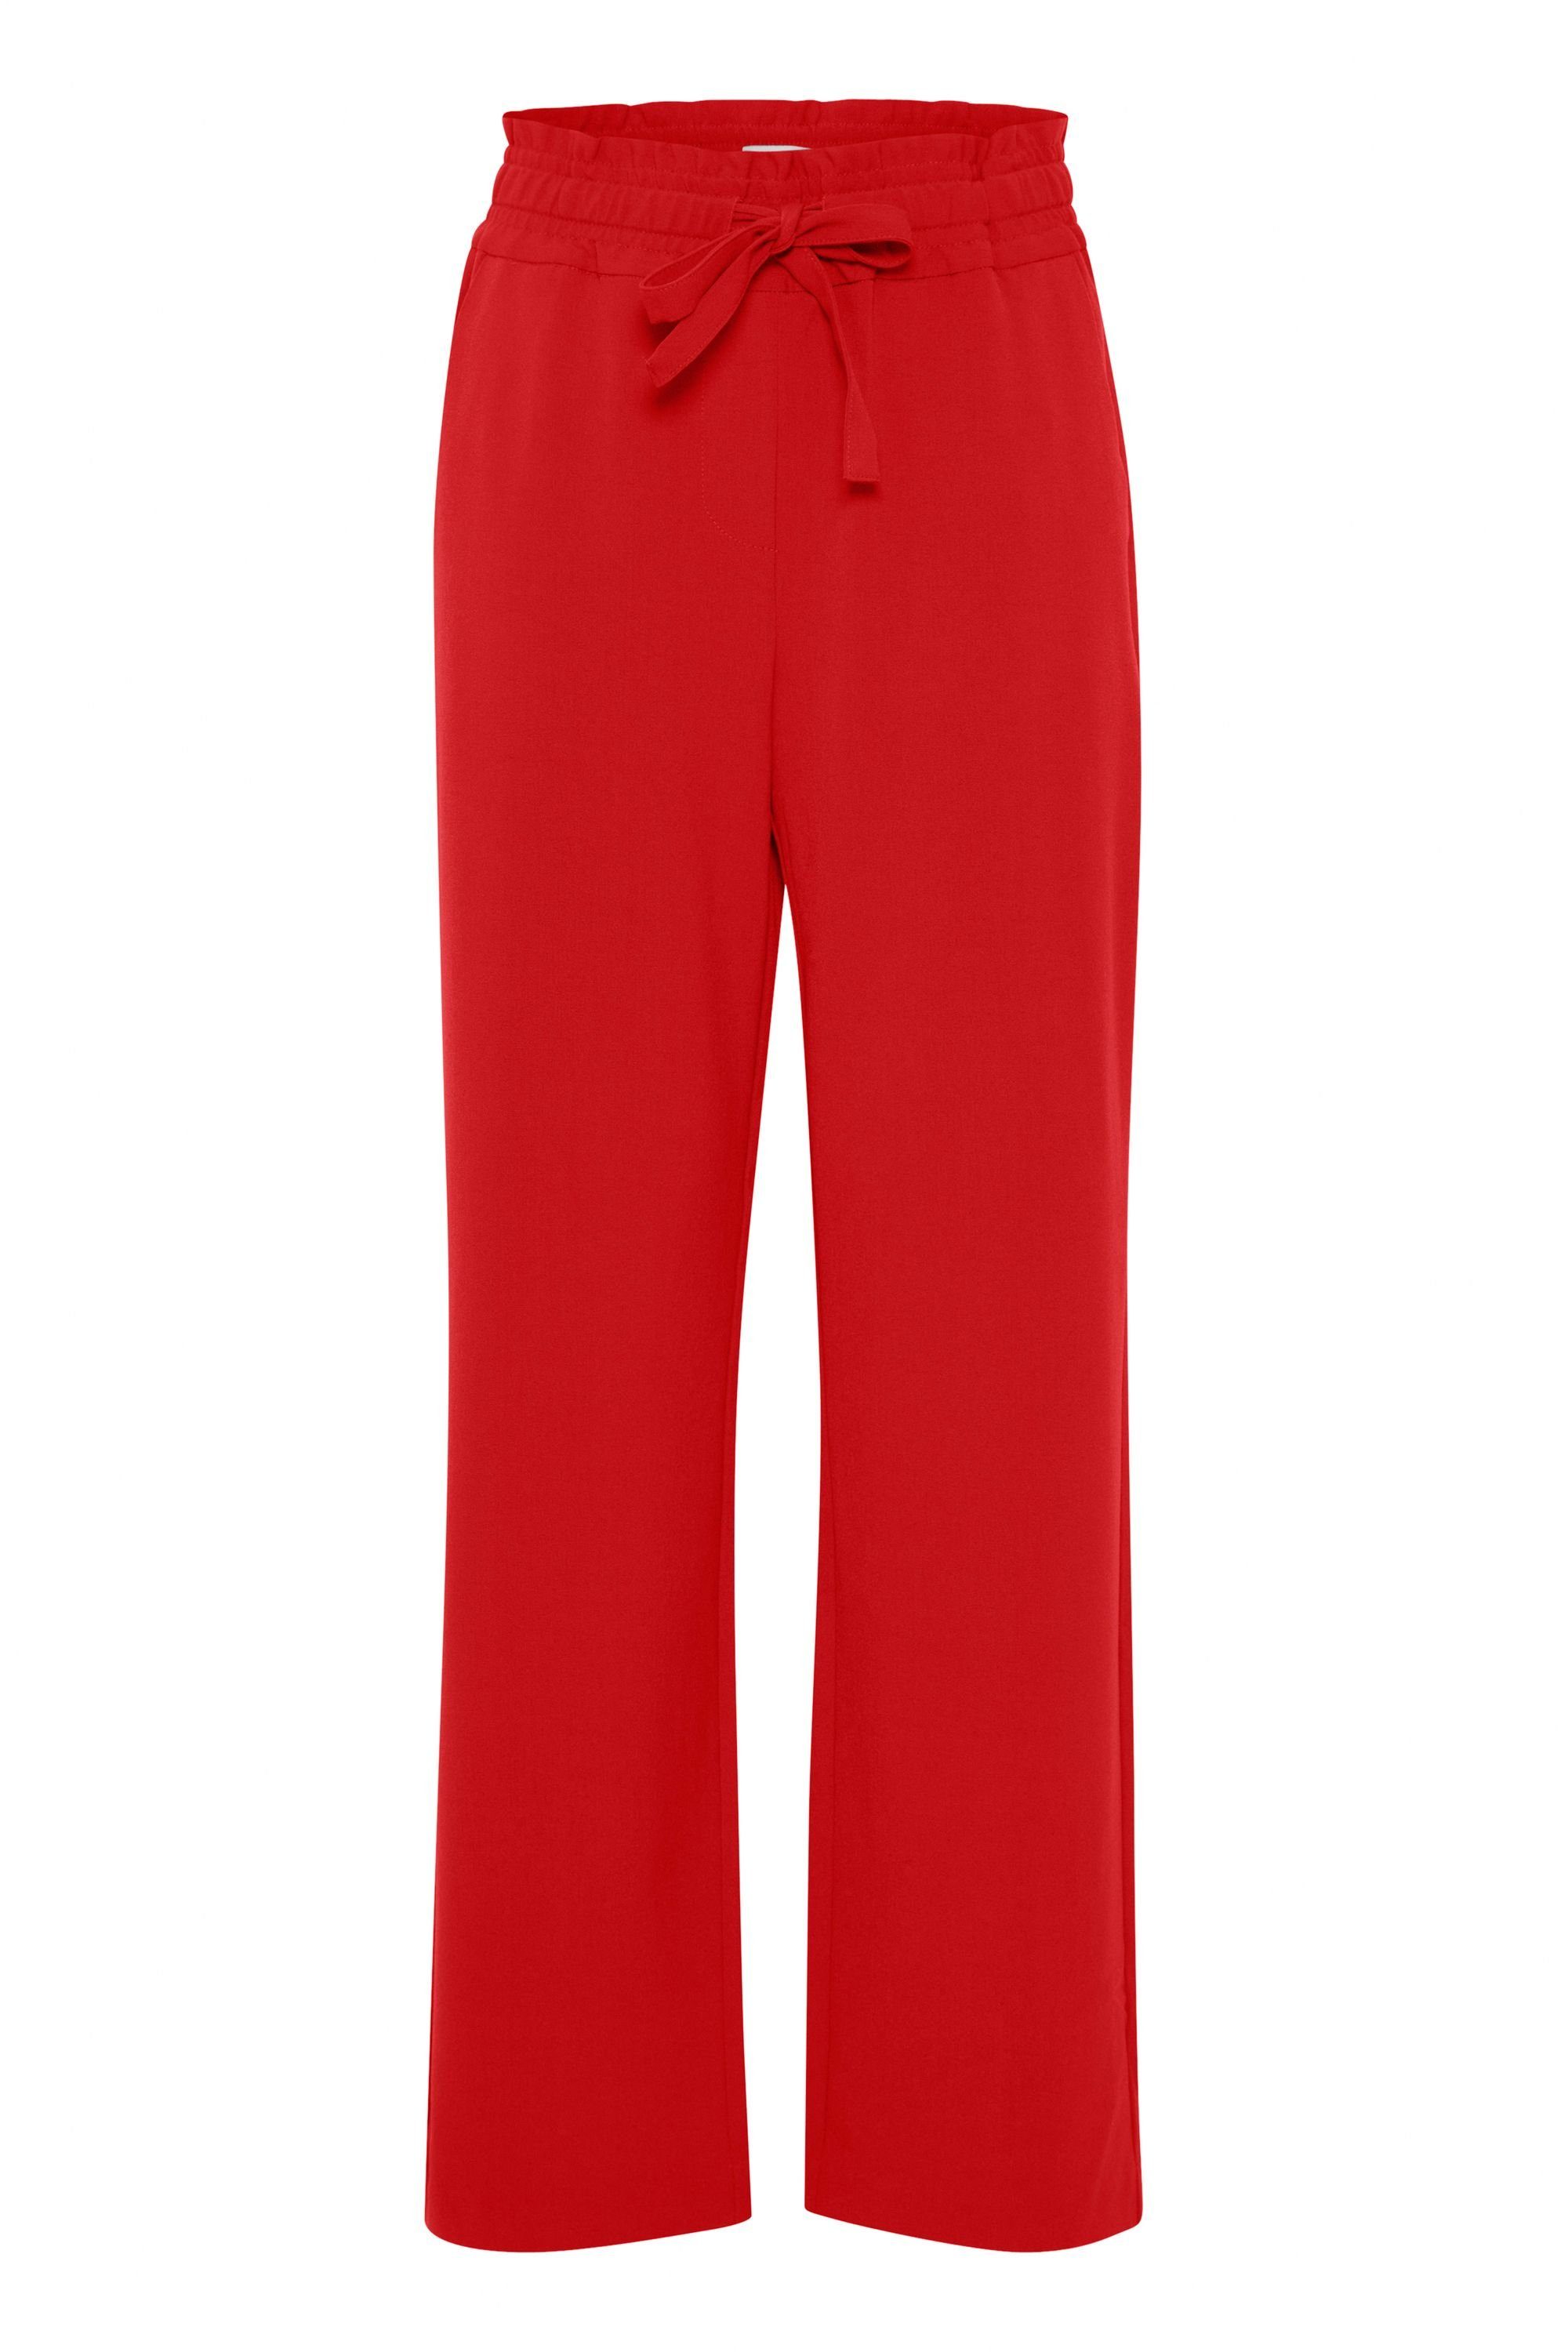 (181663) BYDANTA Jogger 20813077 Y - CASUAL Red Chinese PANT Pants b.young